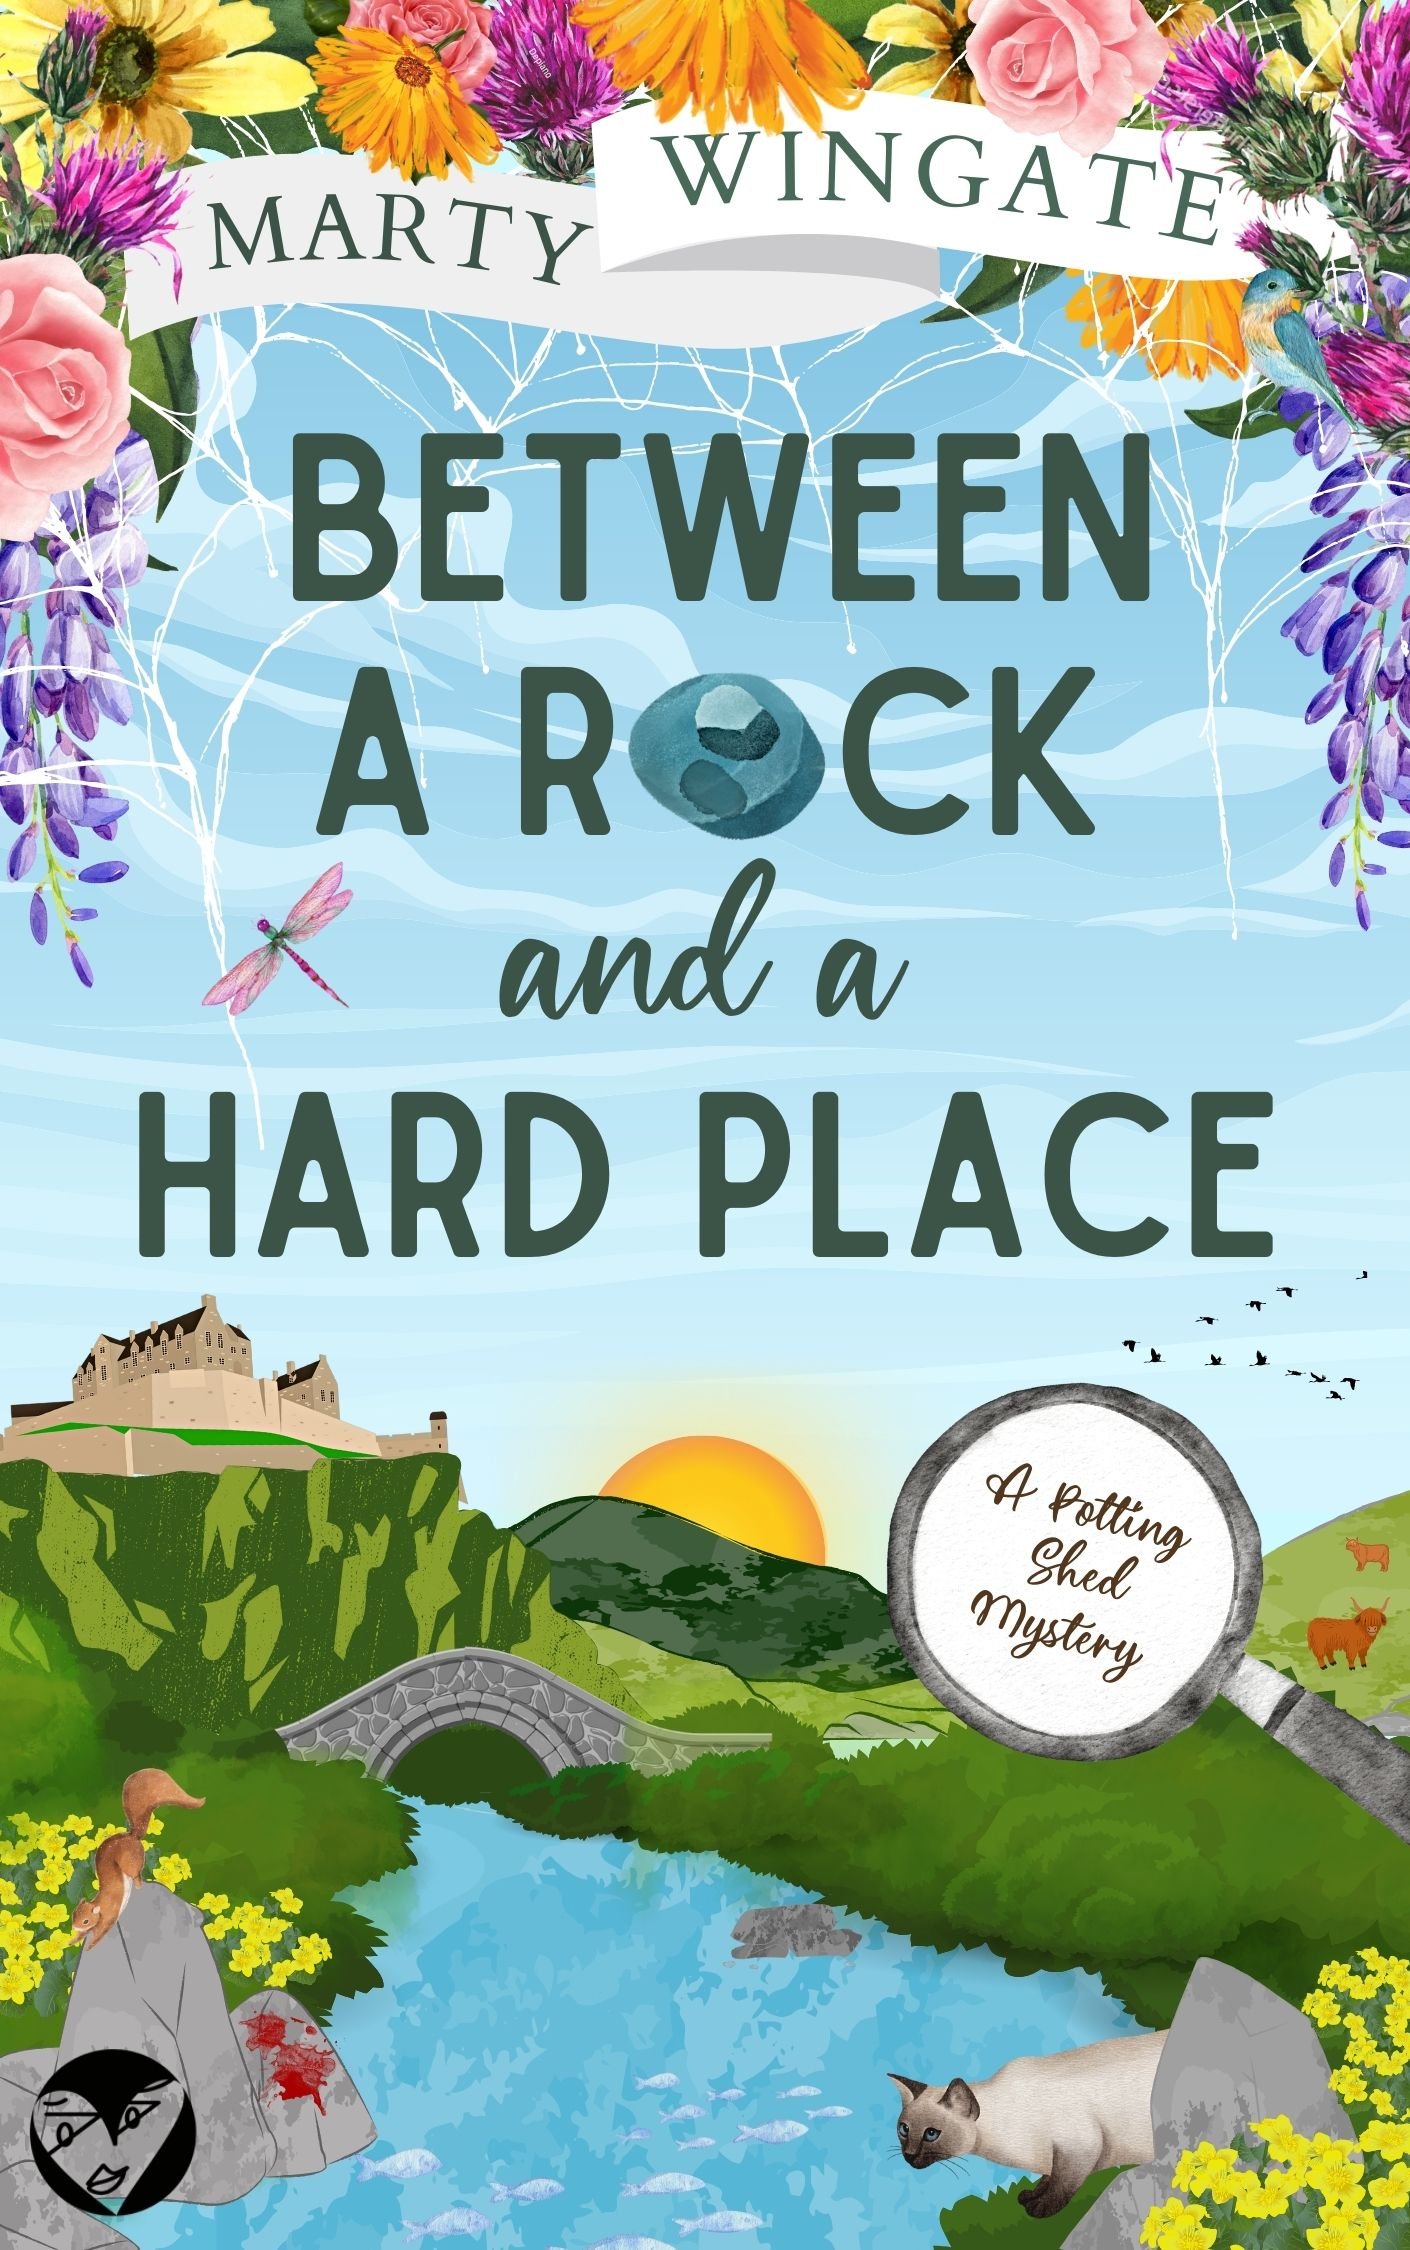 BETWEEN A ROCK AND A HARD PLACE COVER.jpg